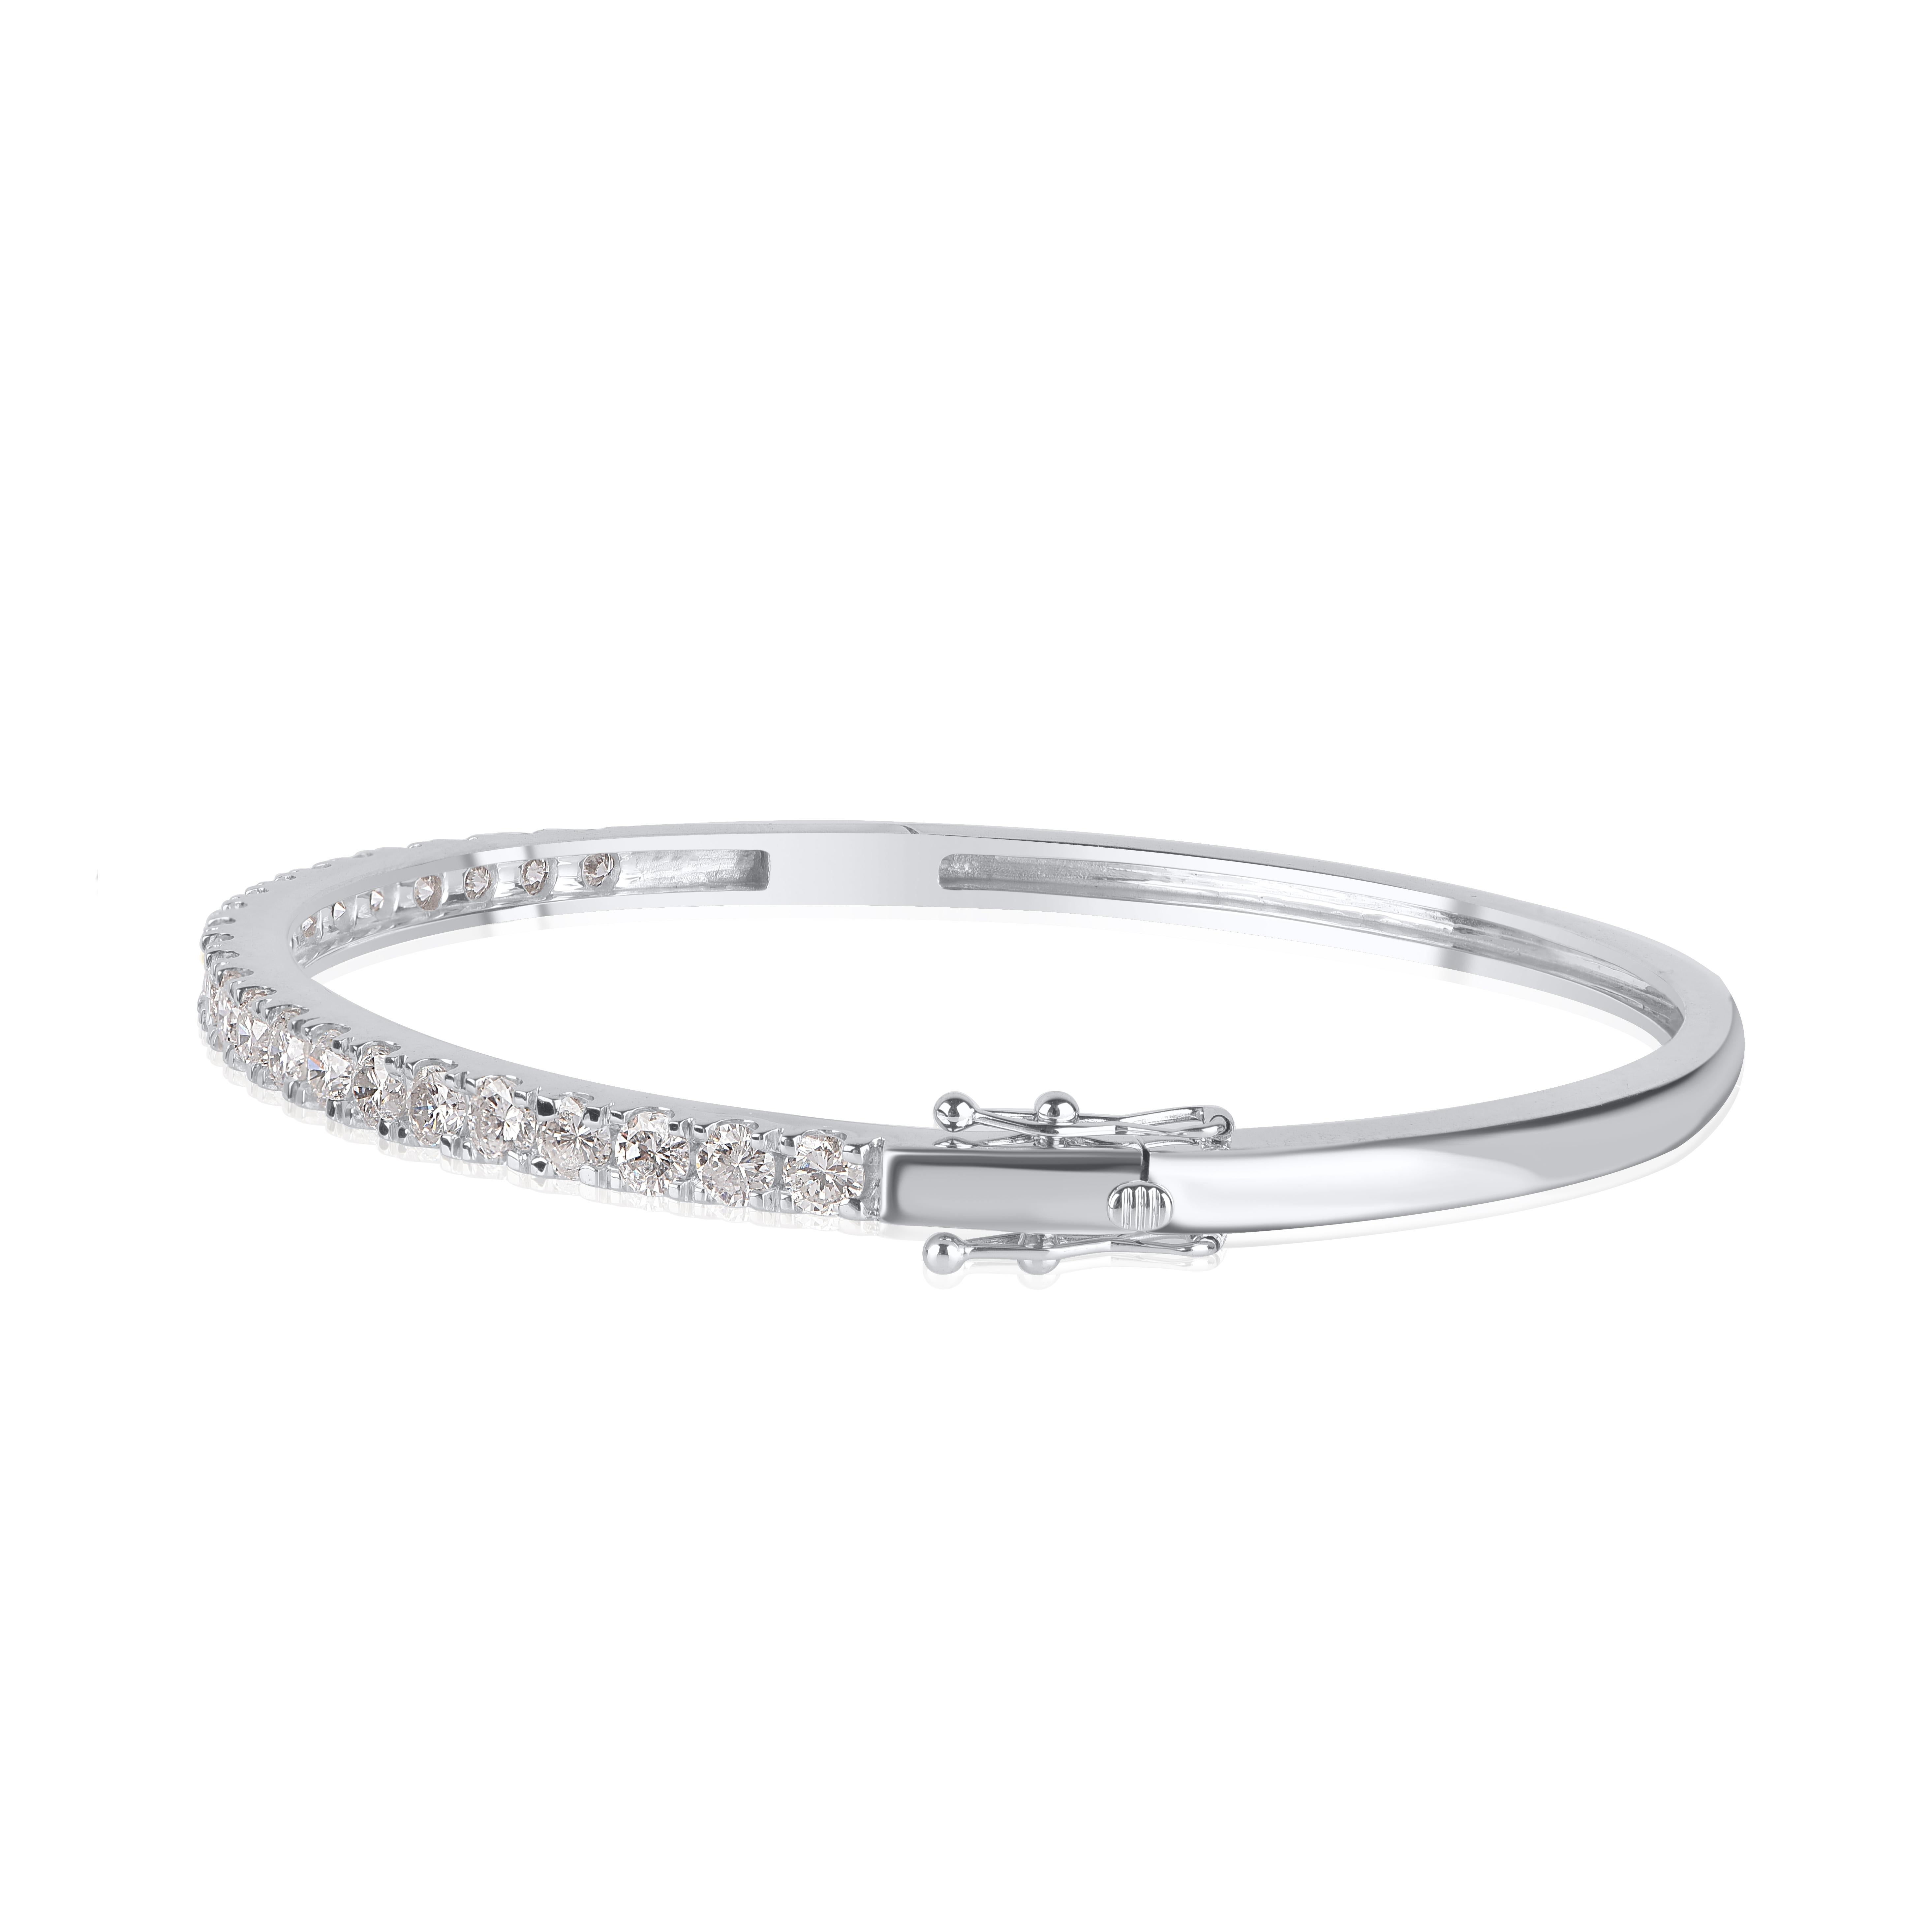 Shimmering, sleek and streamlined, this dazzling diamond bangle is perfect for day or evening wear. This classic design crafted in 10 KT white gold, featuring 23 round-cut diamonds elegantly set in micro-prong setting, diamonds are graded H-I Color,